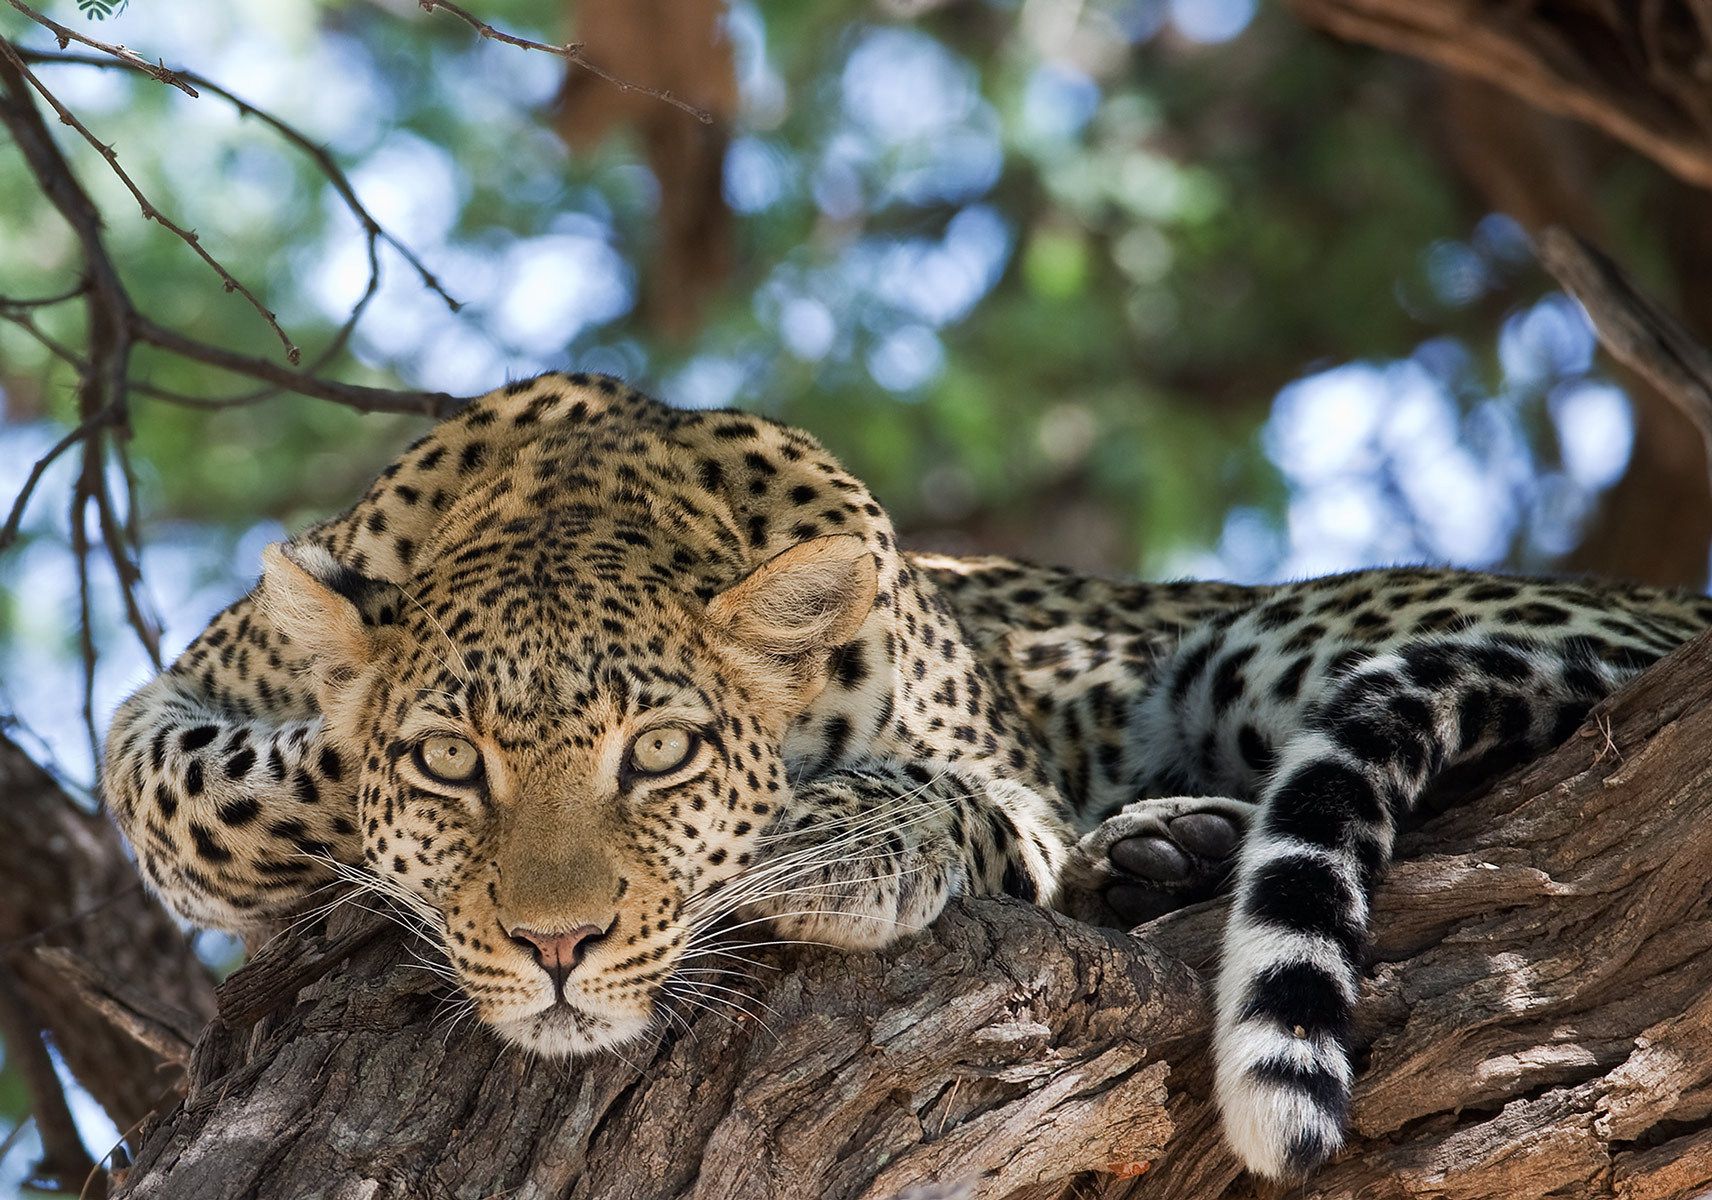 The look of the leopard